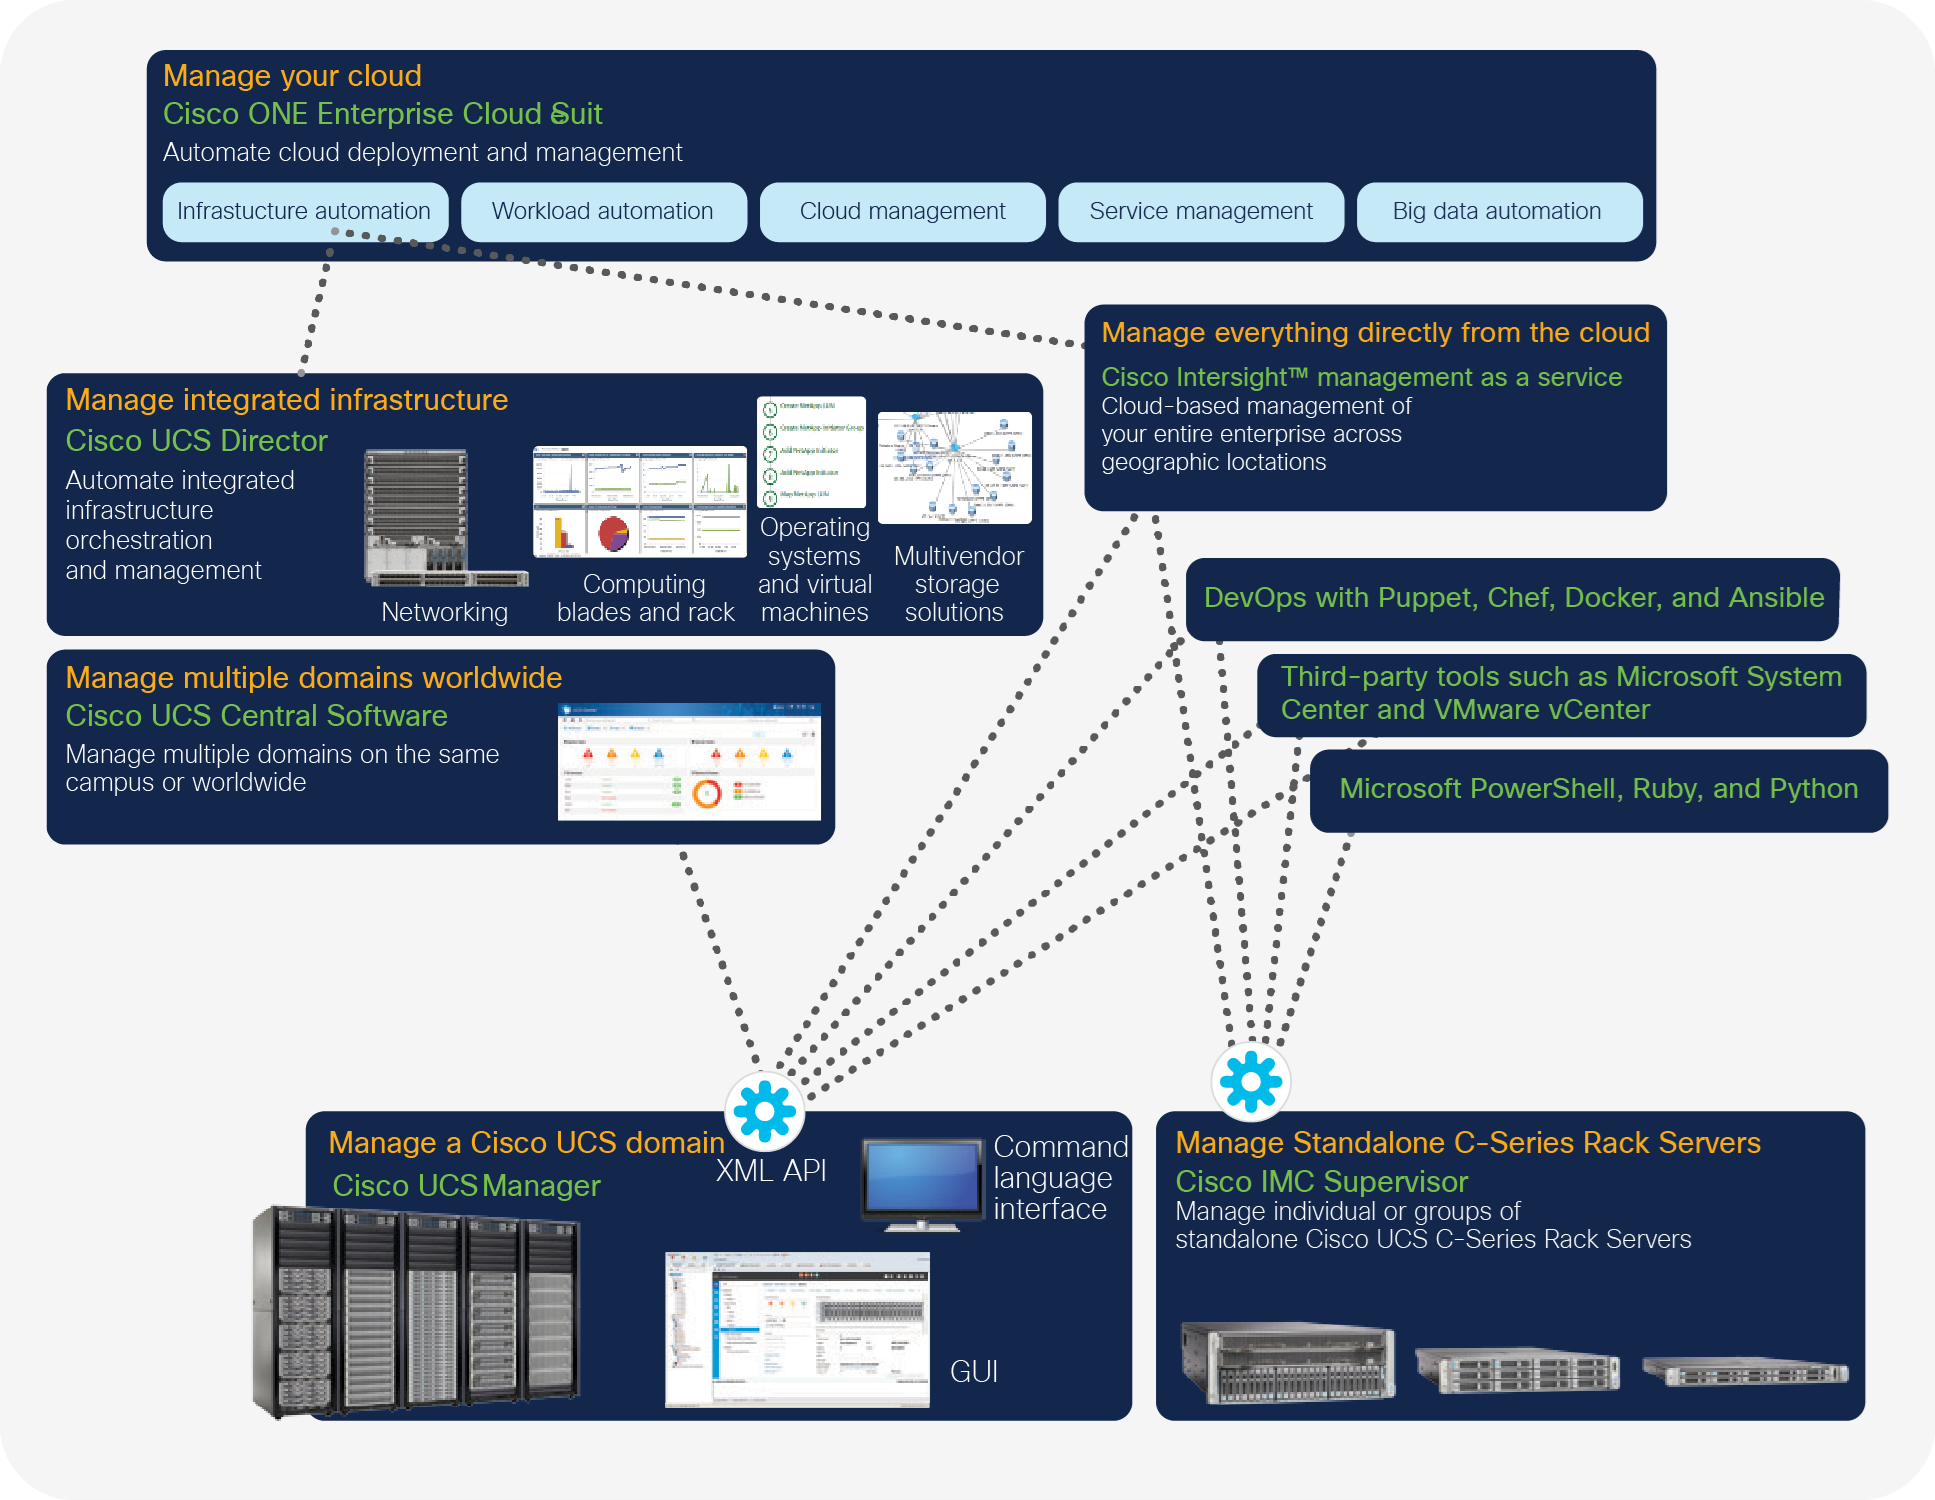 Cisco UCS XML API helps you automate and orchestrate management at all levels